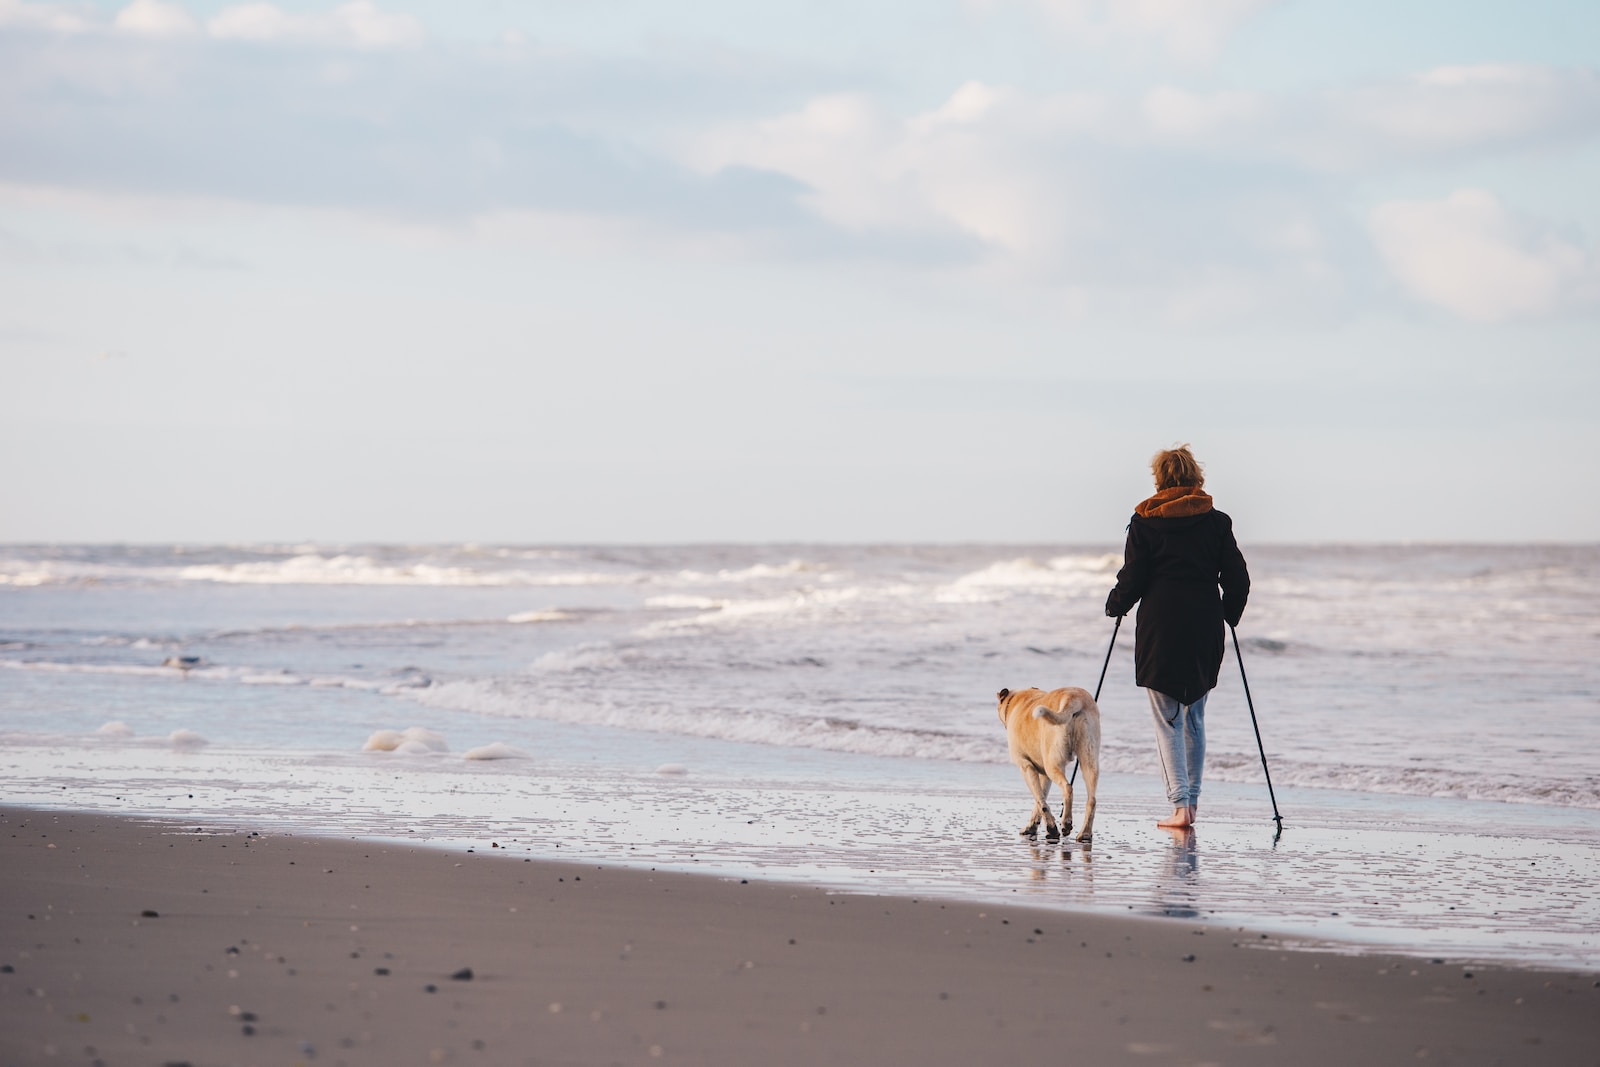 woman in black jacket walking with dog on beach during daytime